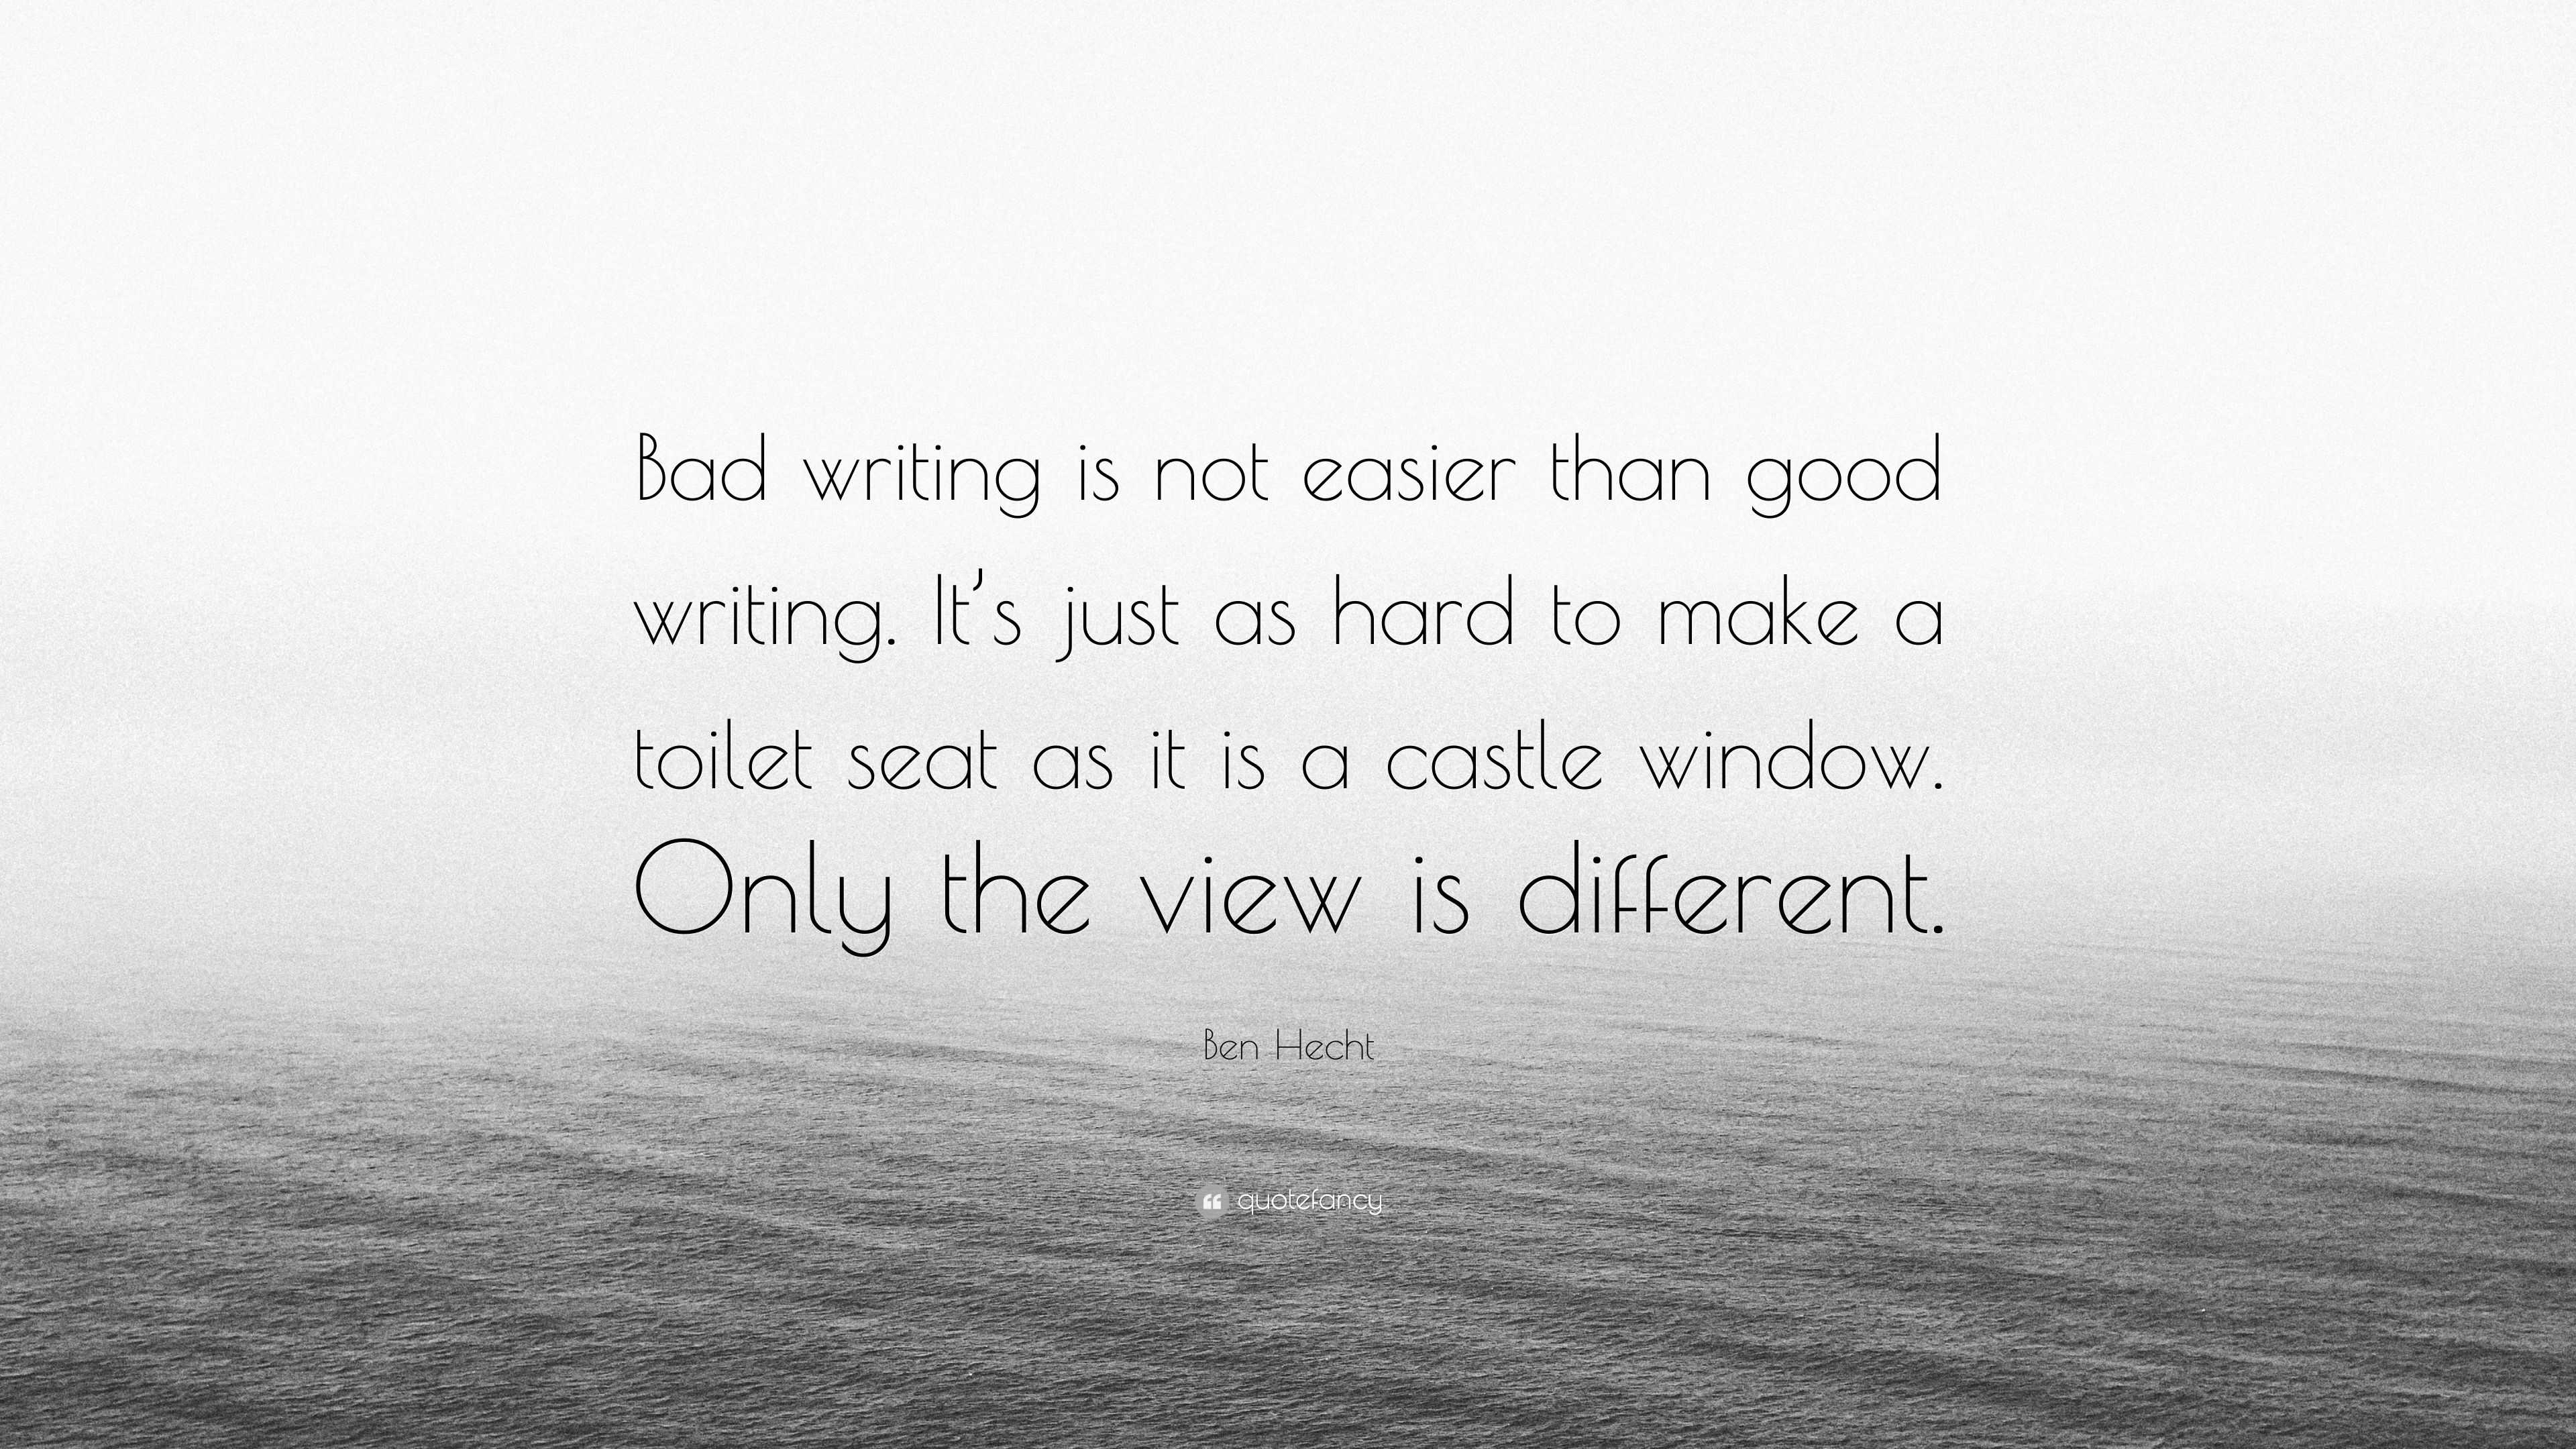 A Good Writer Is Hard To Find. Most of us are really bad at